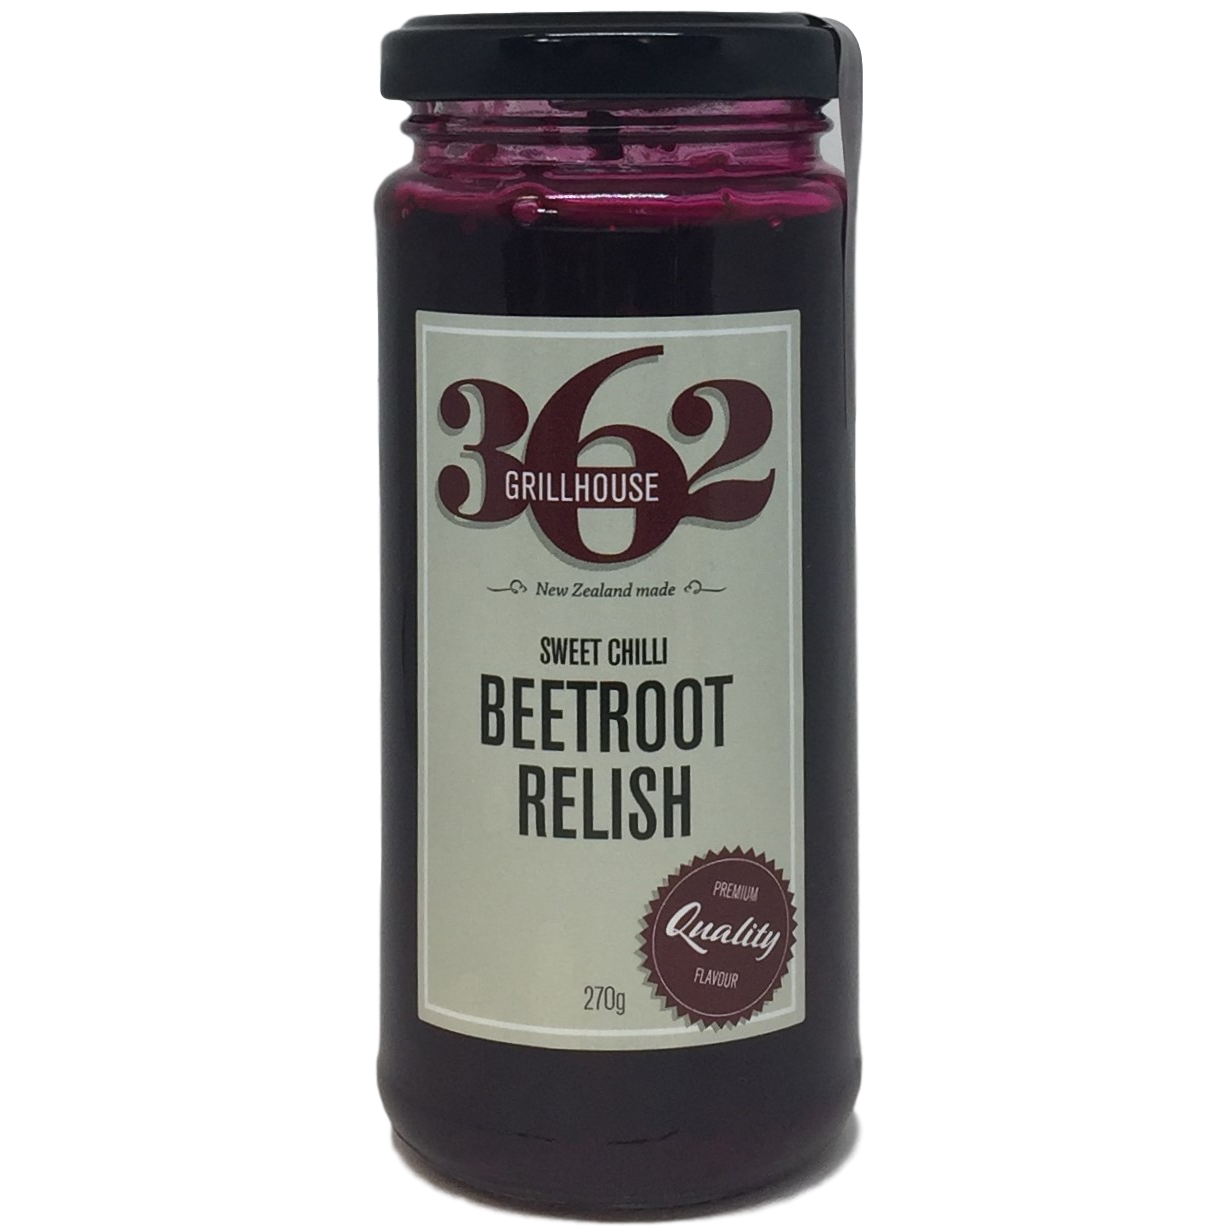 362 Grillhouse - Sweet Chilli Beetroot Relish